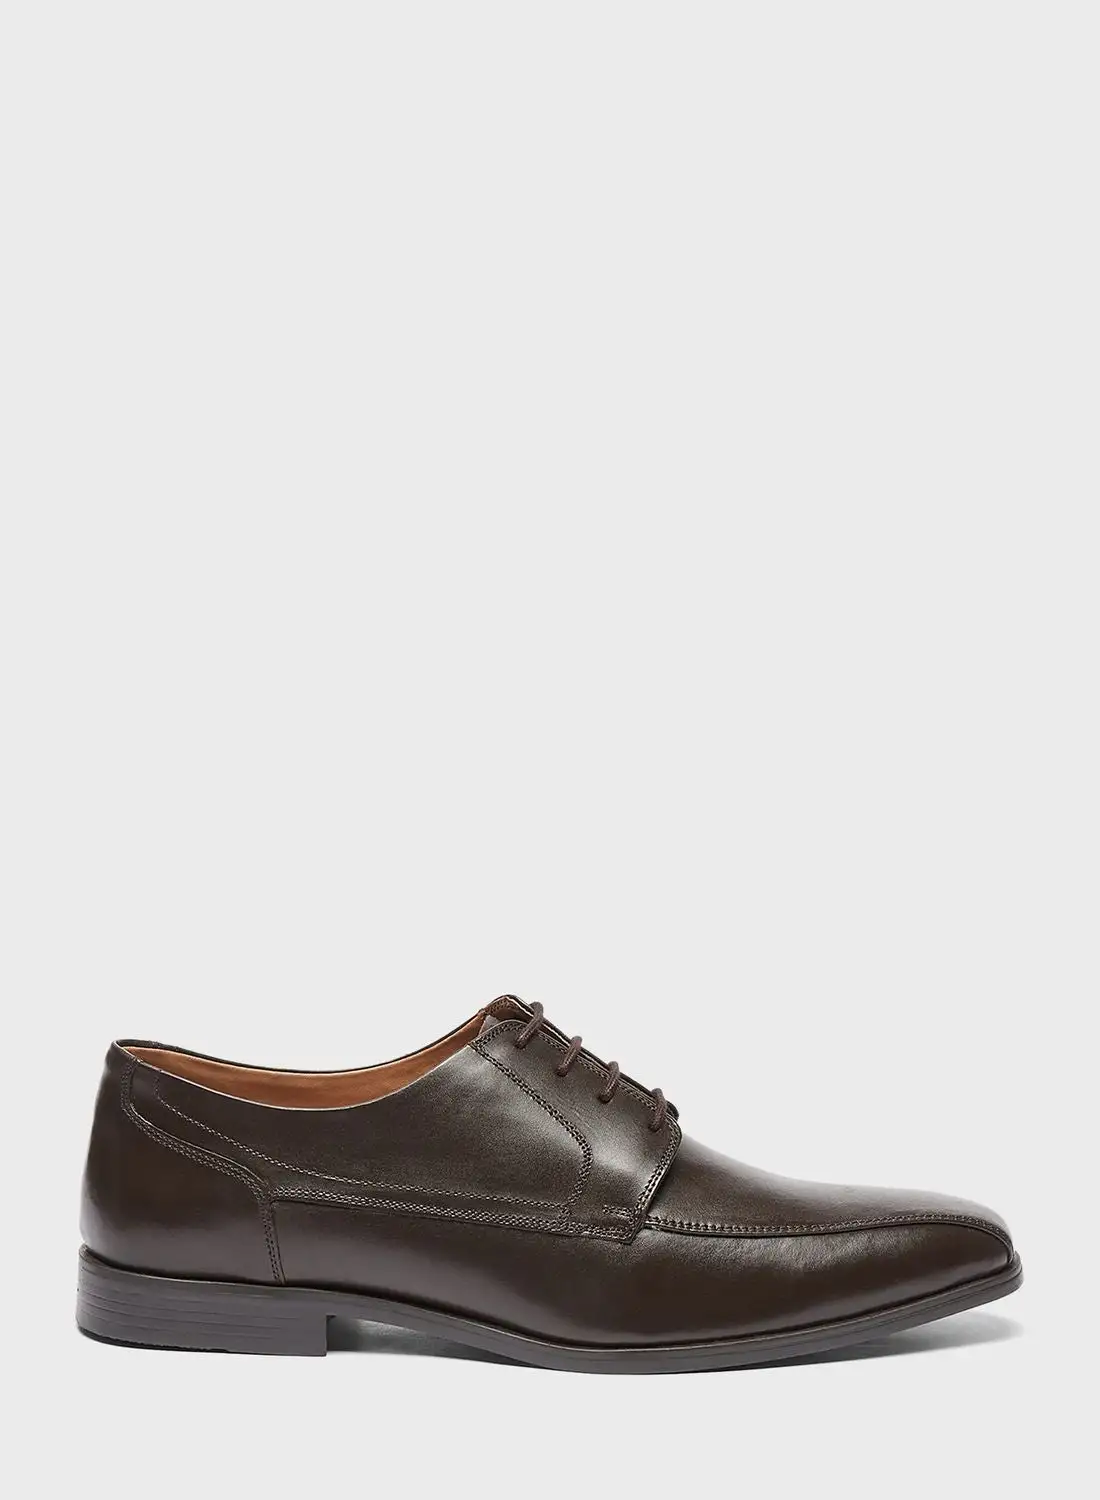 LBL by Shoexpress Lace Up Formal Shoes